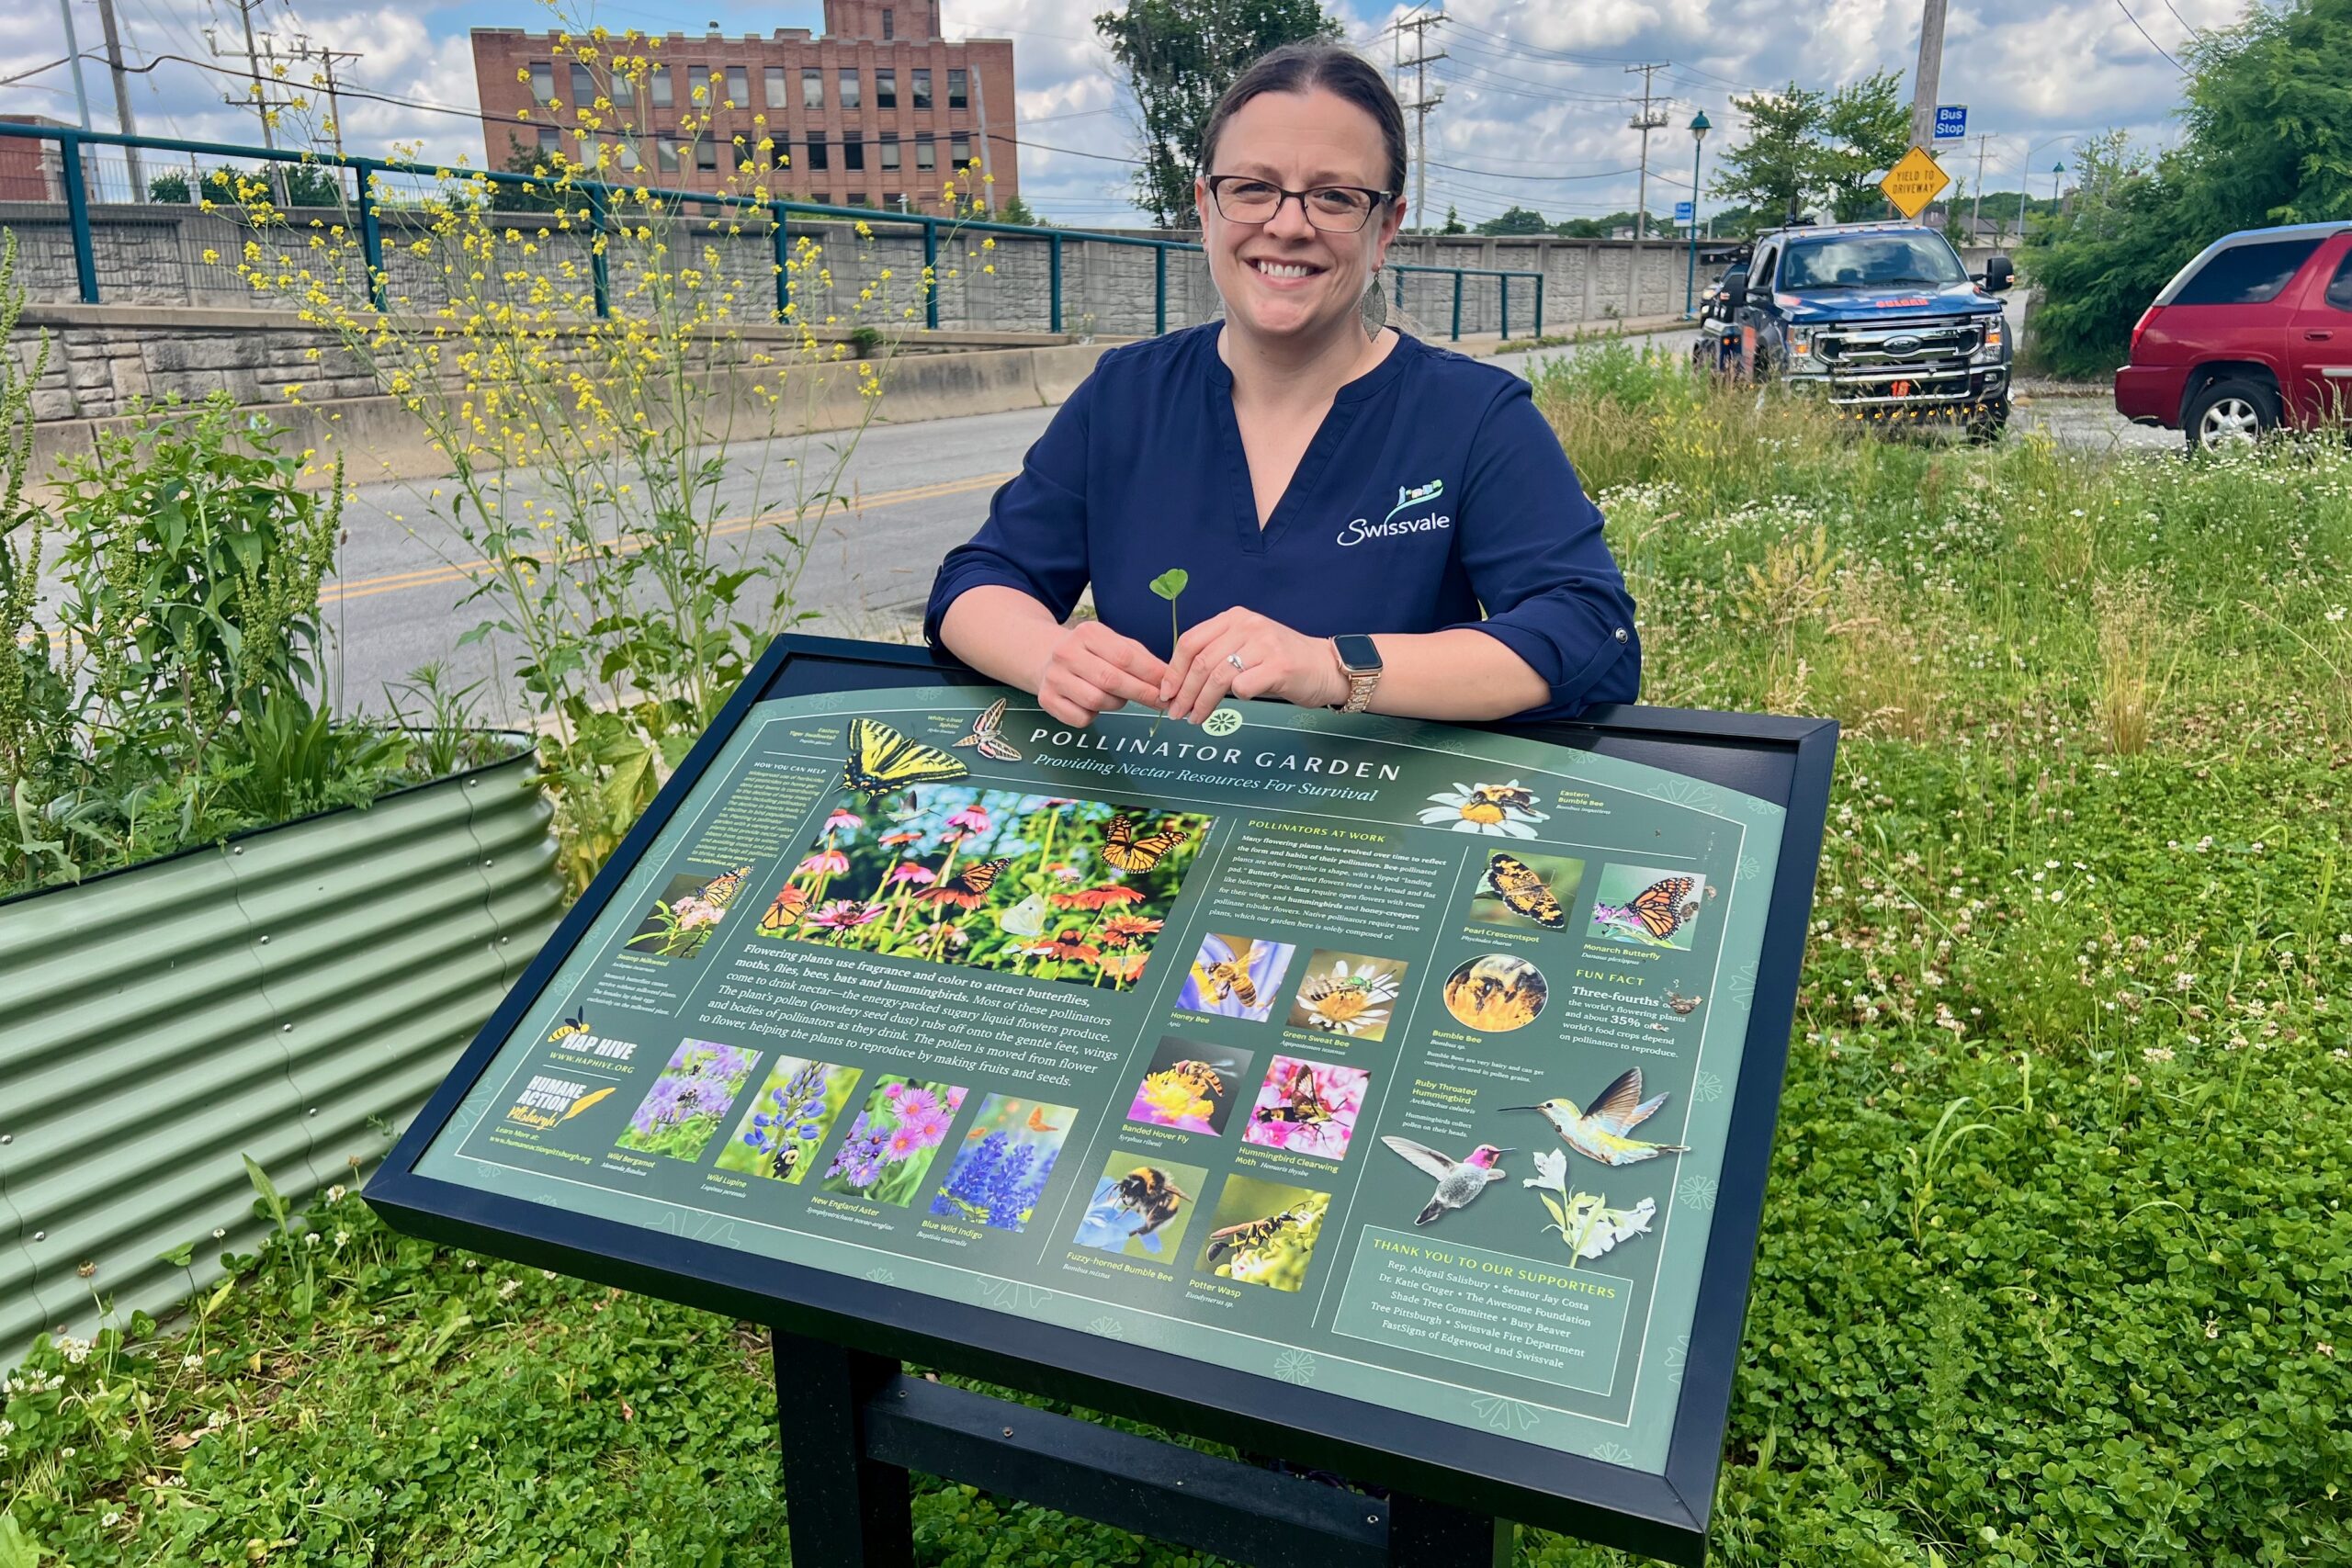 A woman smiles and rests her arms on a sign depicting flowers and insects at the edge of an outdoor garden